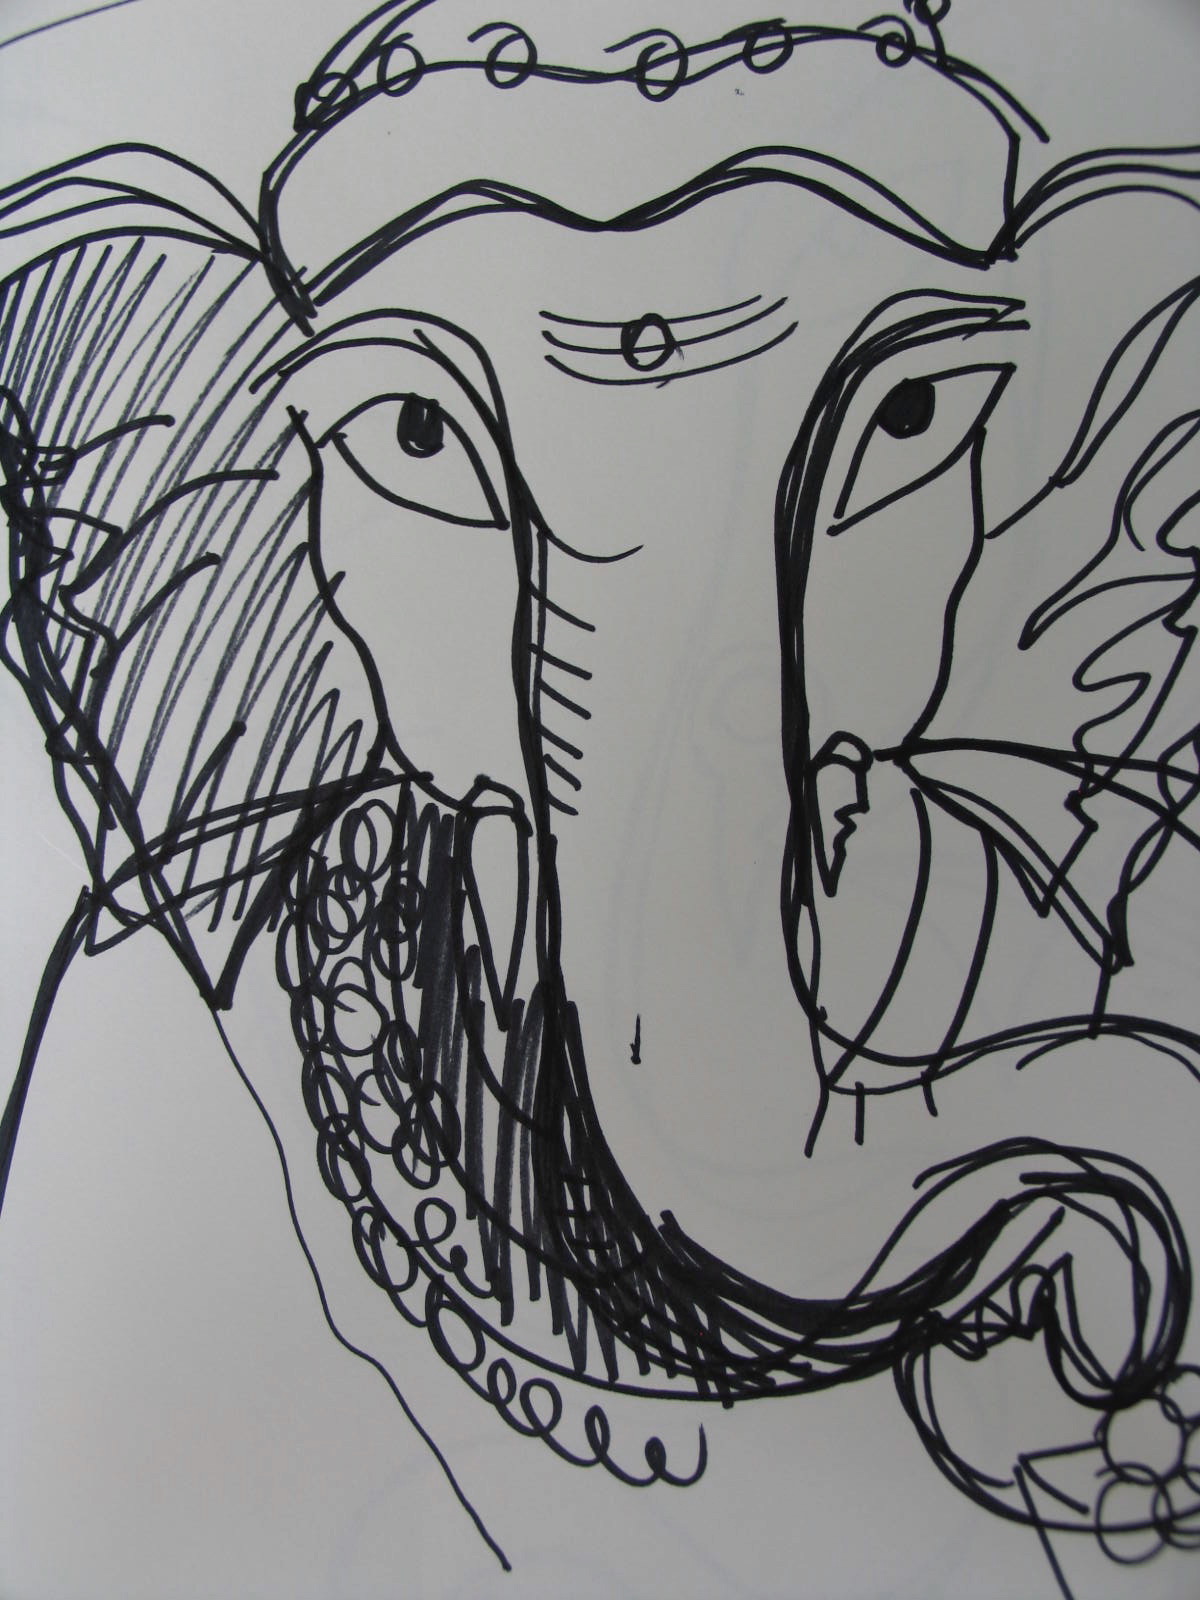 How to Draw Simple Lord Ganesha Drawing Step by step - YouTube